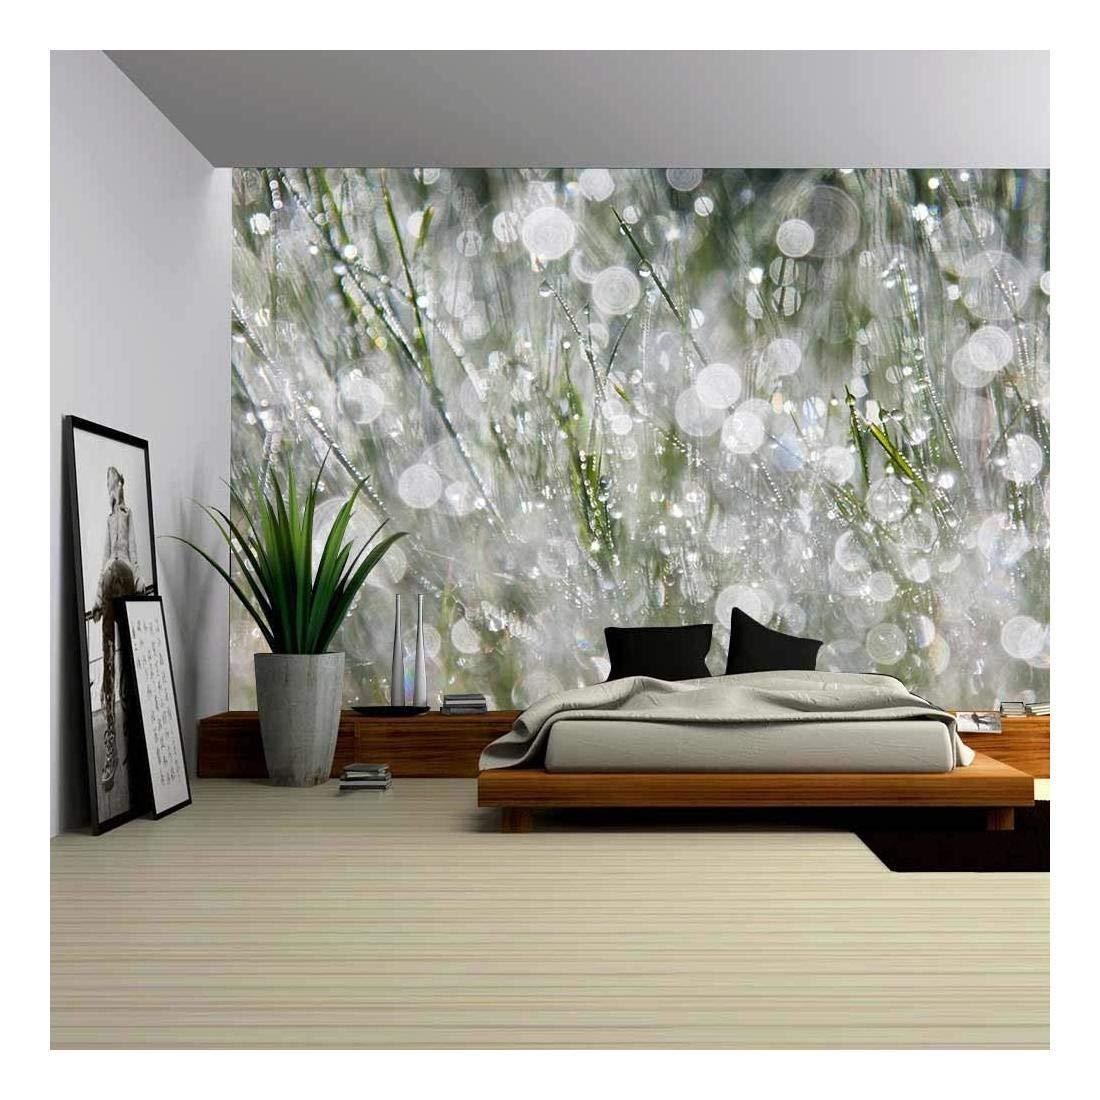 1100 x 1100 · jpeg - Wall26 the Morning Dew - Removable Wall Mural | Self-adhesive Large ...